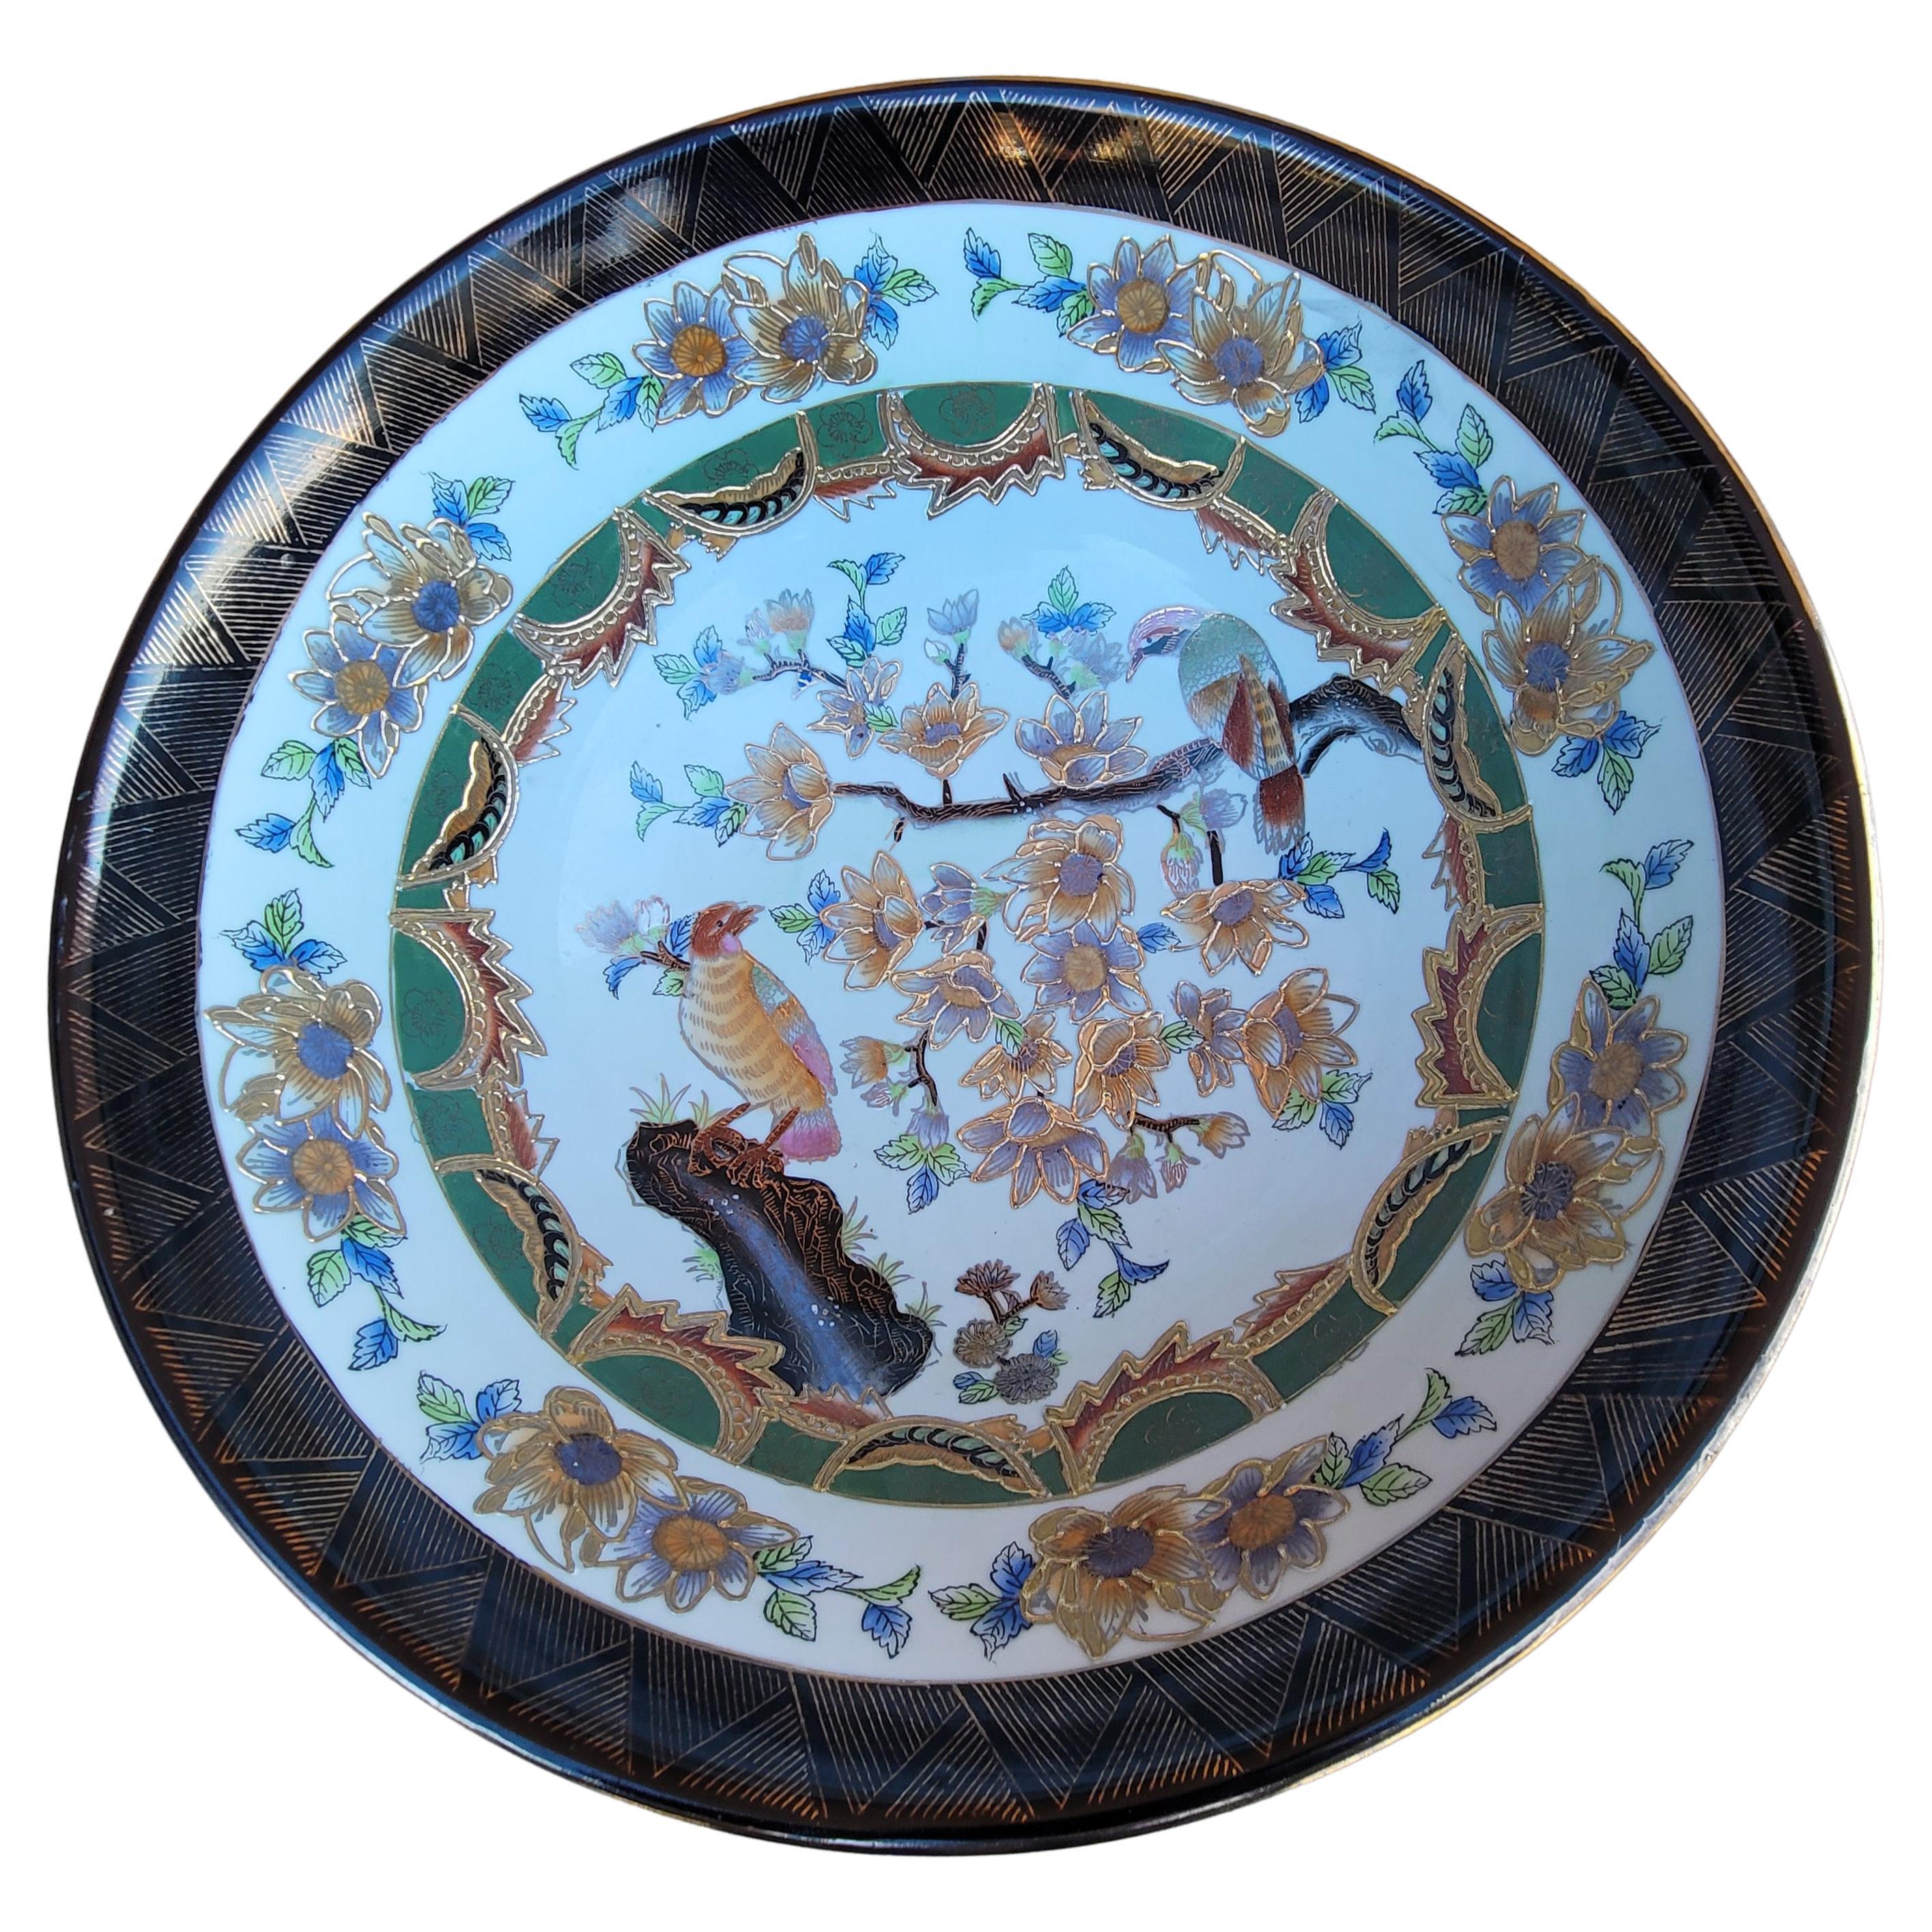 Large Hand-Painted Chinese Enamel And Gilt Decorated Porcelain Bowl In Good Condition For Sale In Germantown, MD